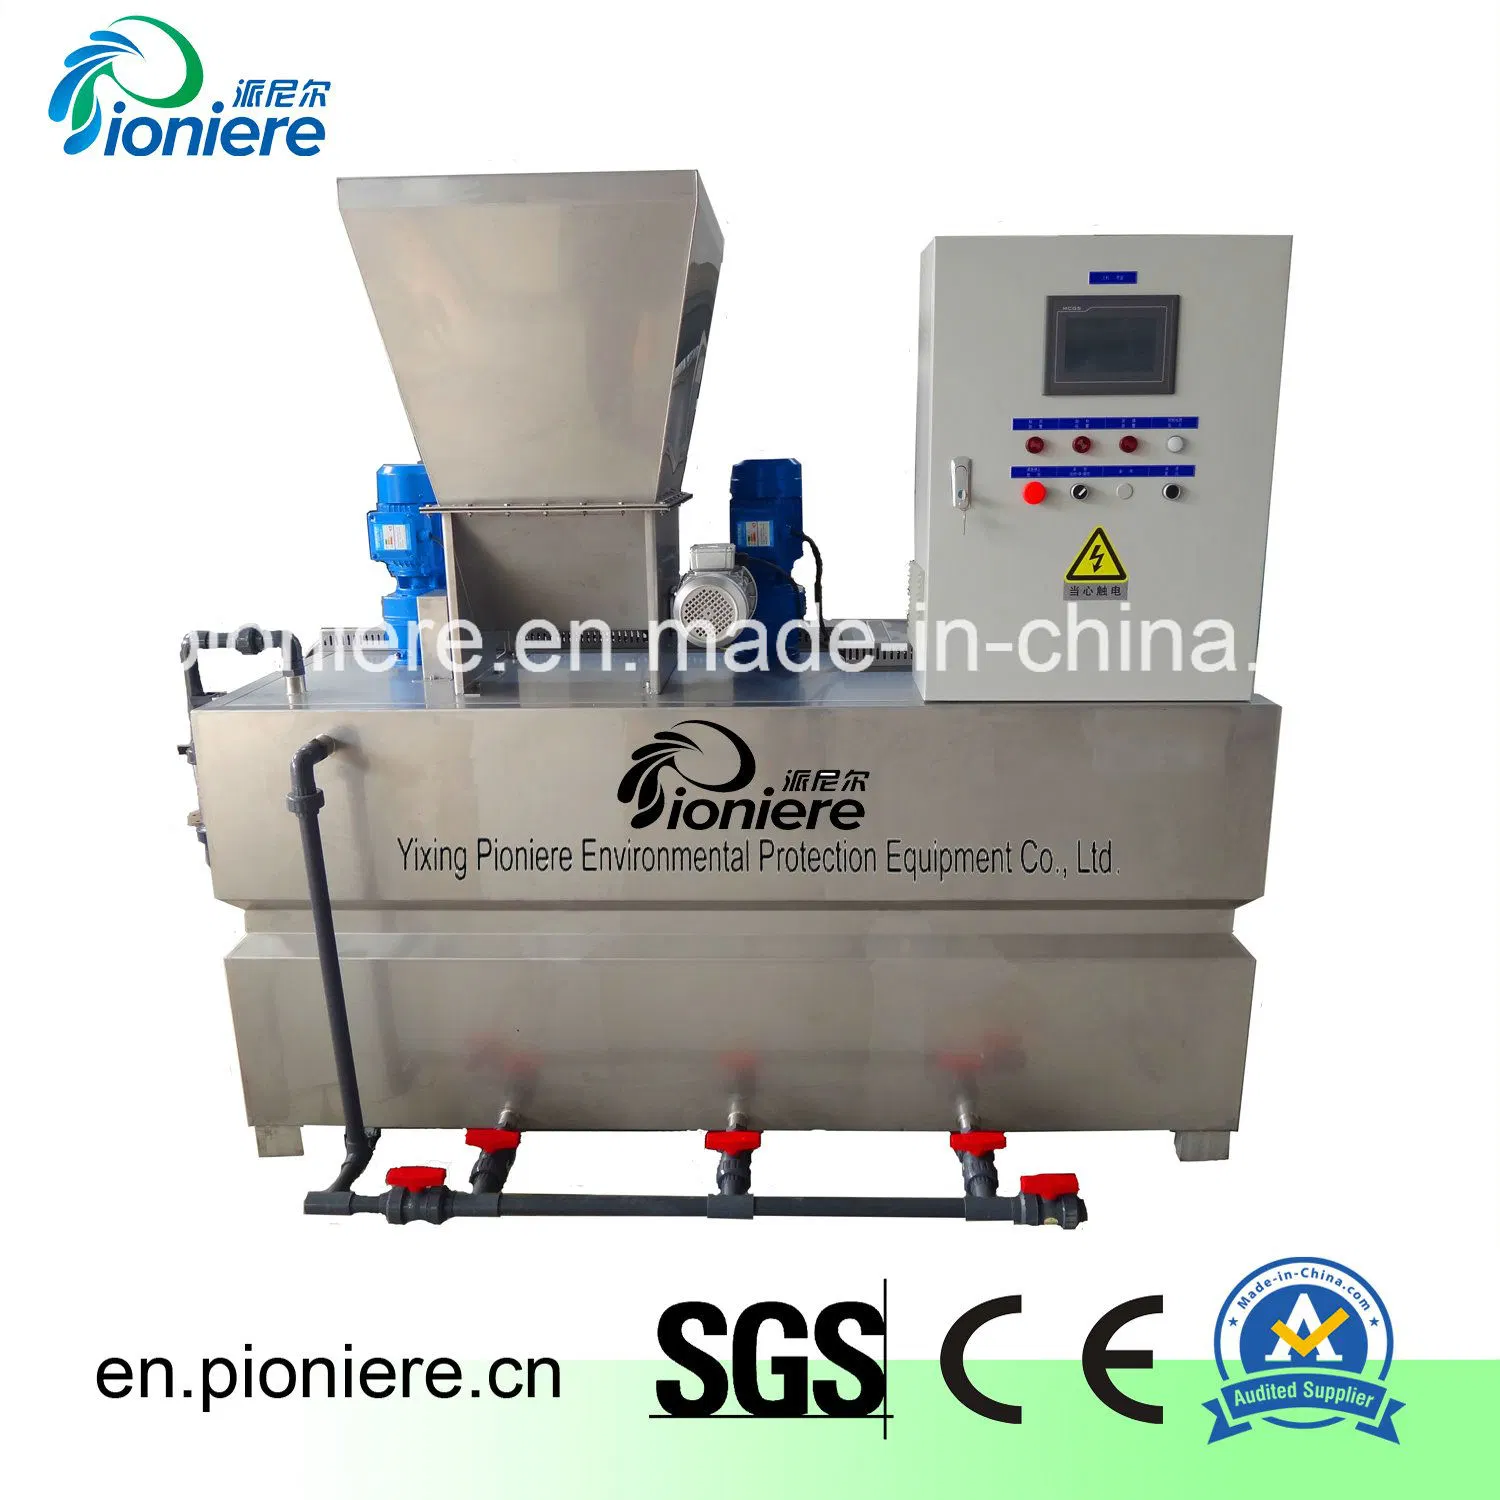 Automated Polymer Dispensing Machine for Municipal Water